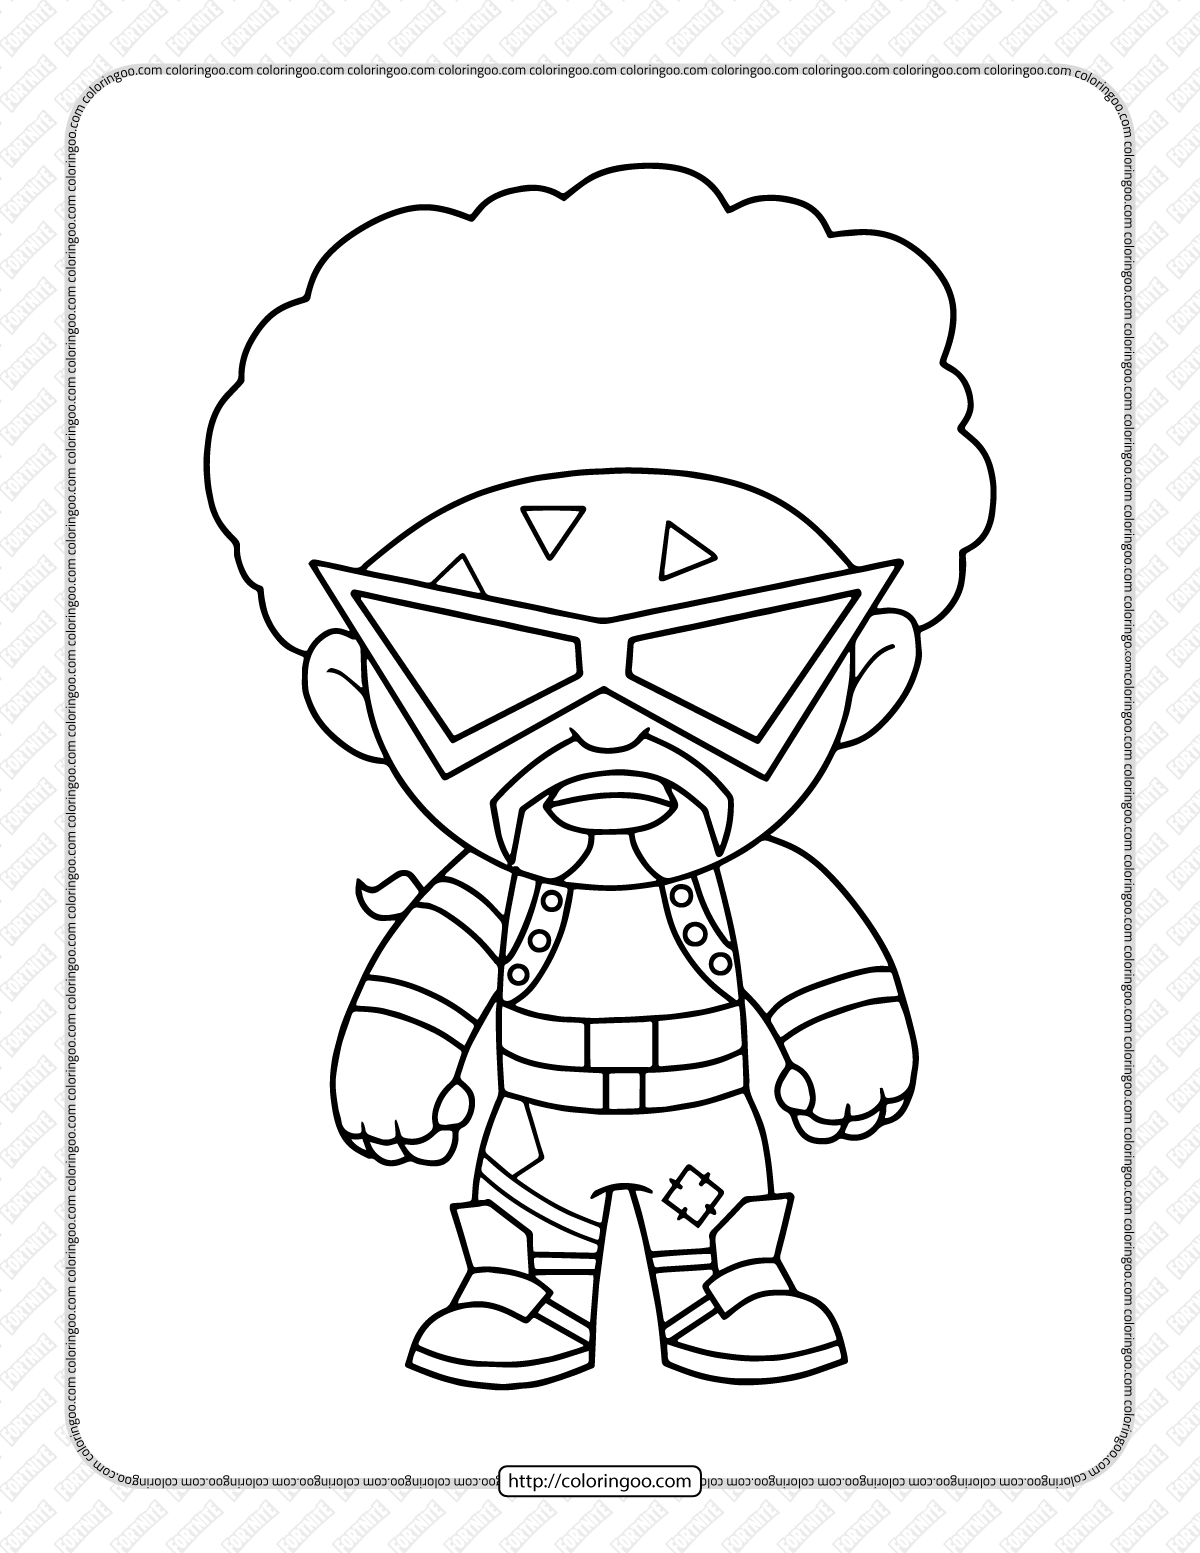 chibi fortnite coloring pages 16